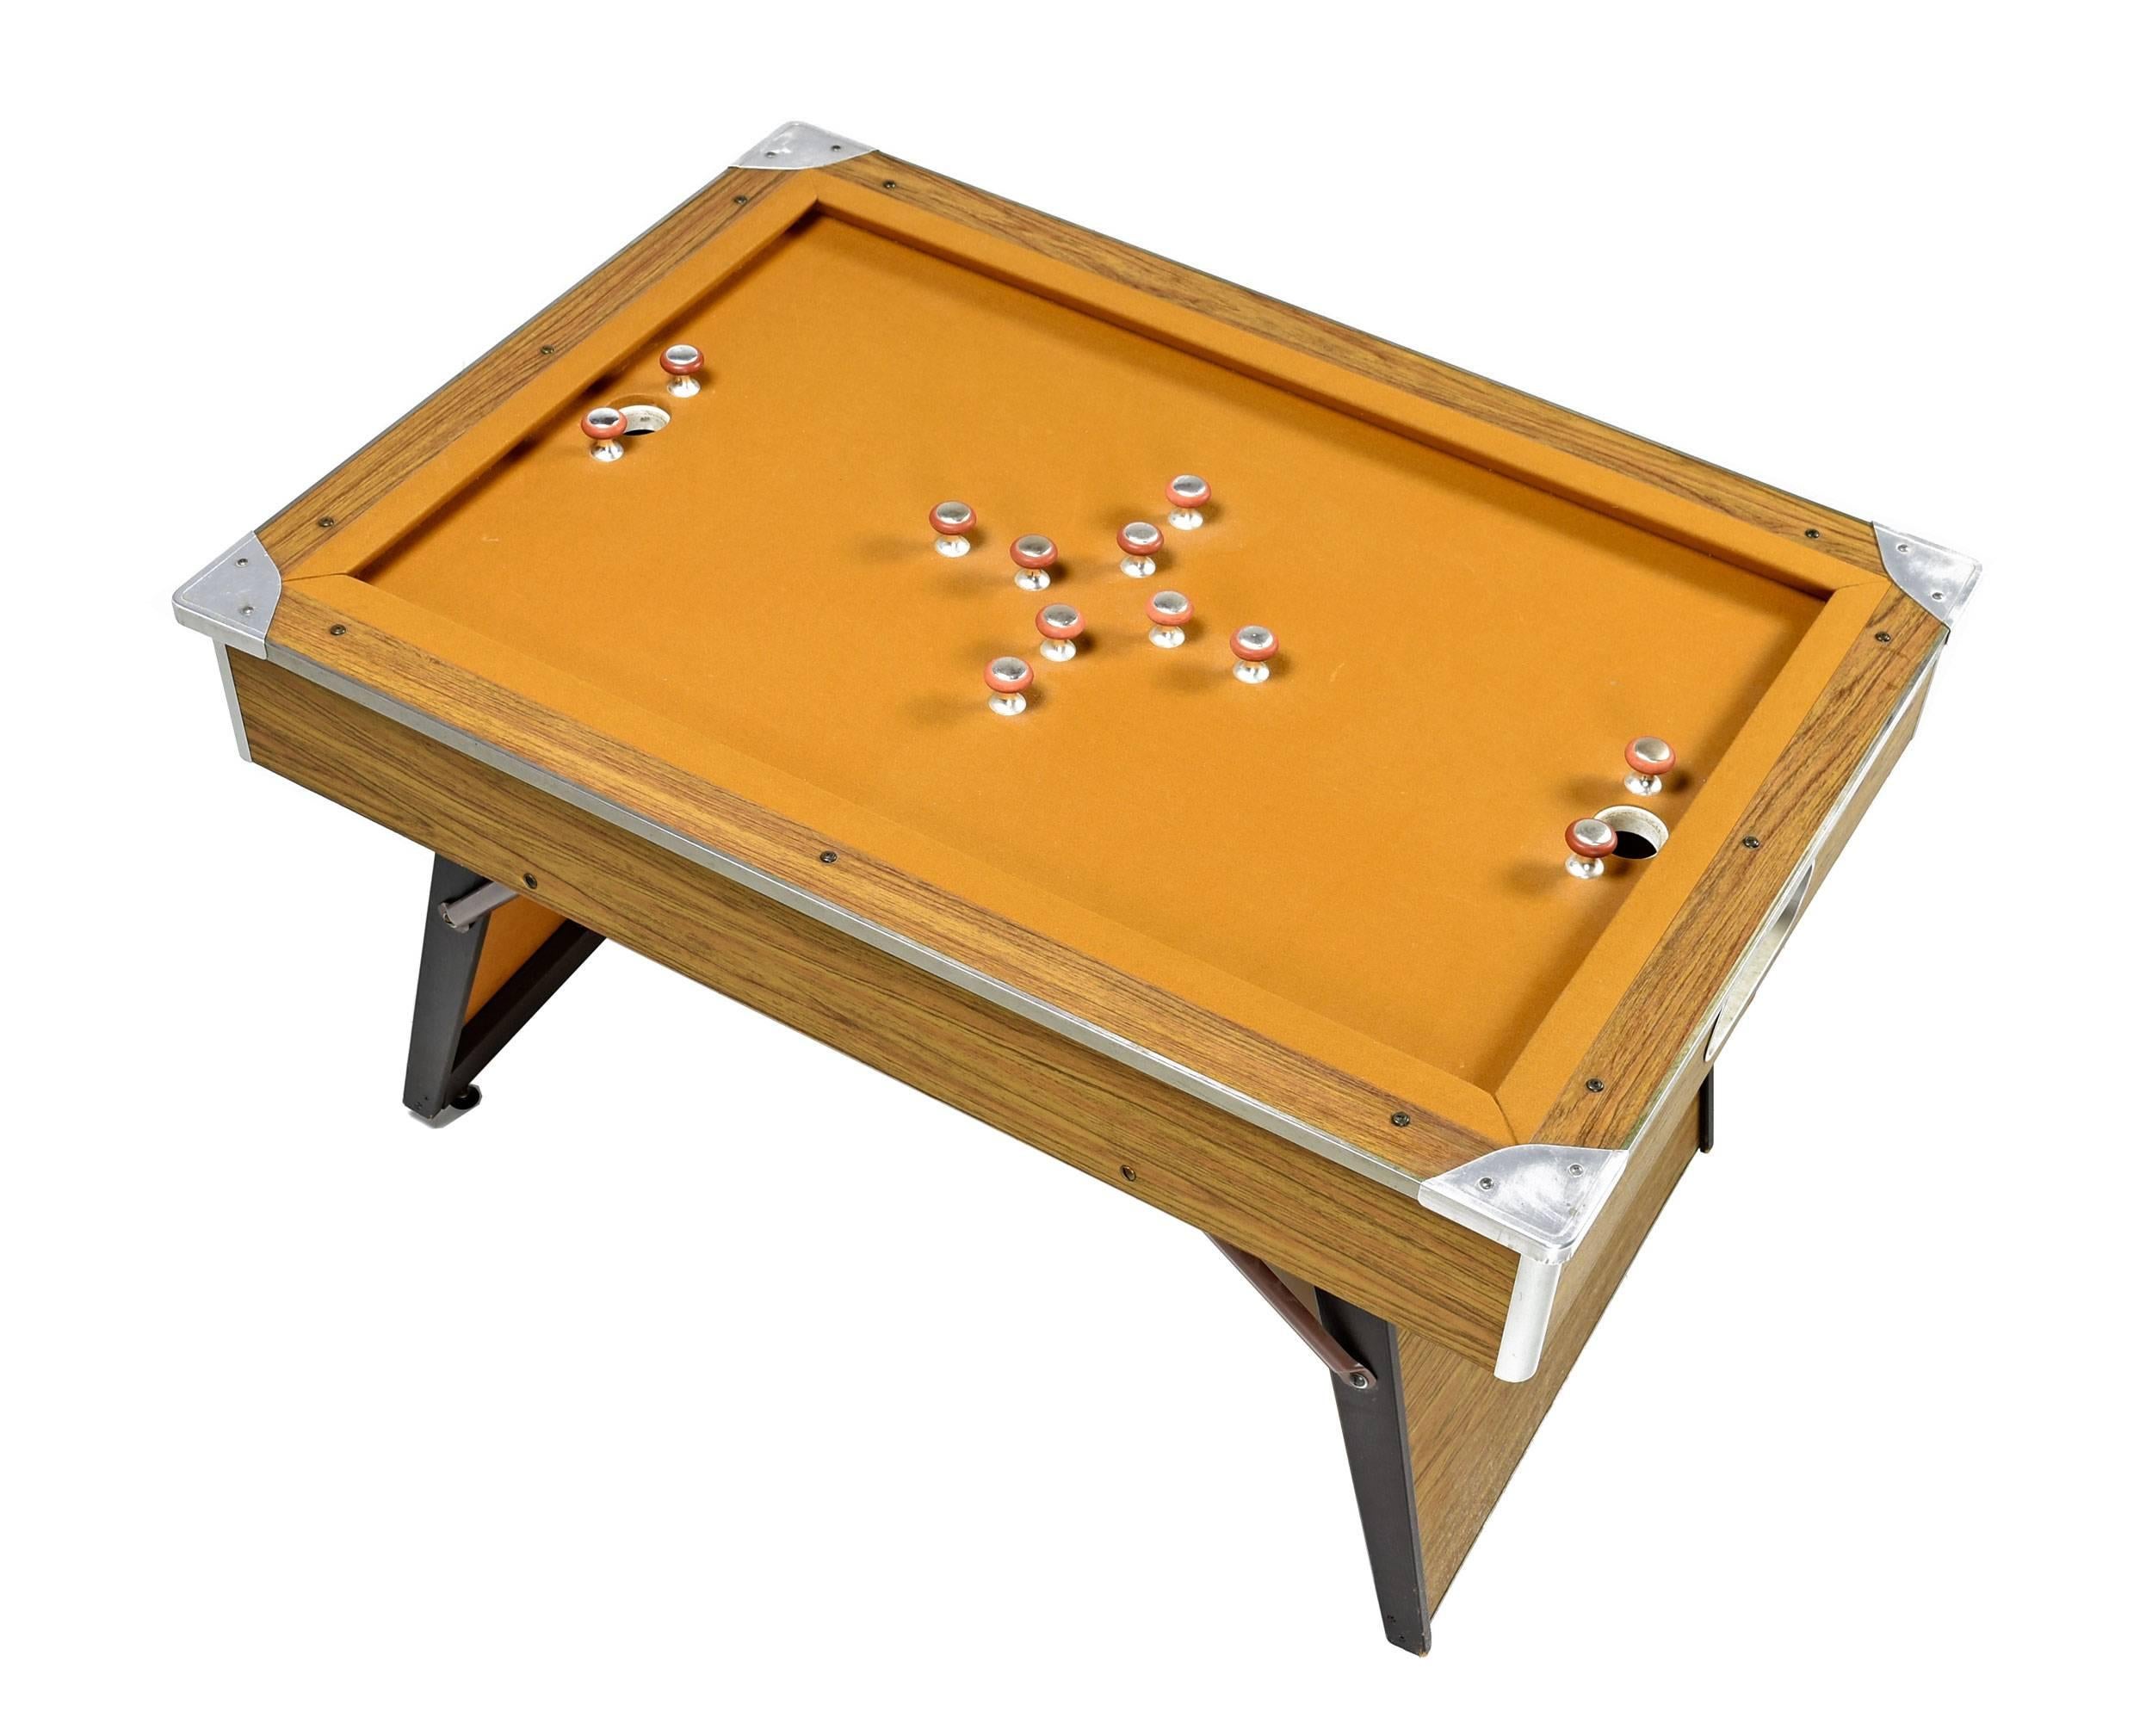 This super stylish modern 1970s vintage bumper pool table is a rare find, and much more accommodating than a standard pool table. The table features the original mustard yellow felt, and comes complete with cue sticks and balls. The legs fold